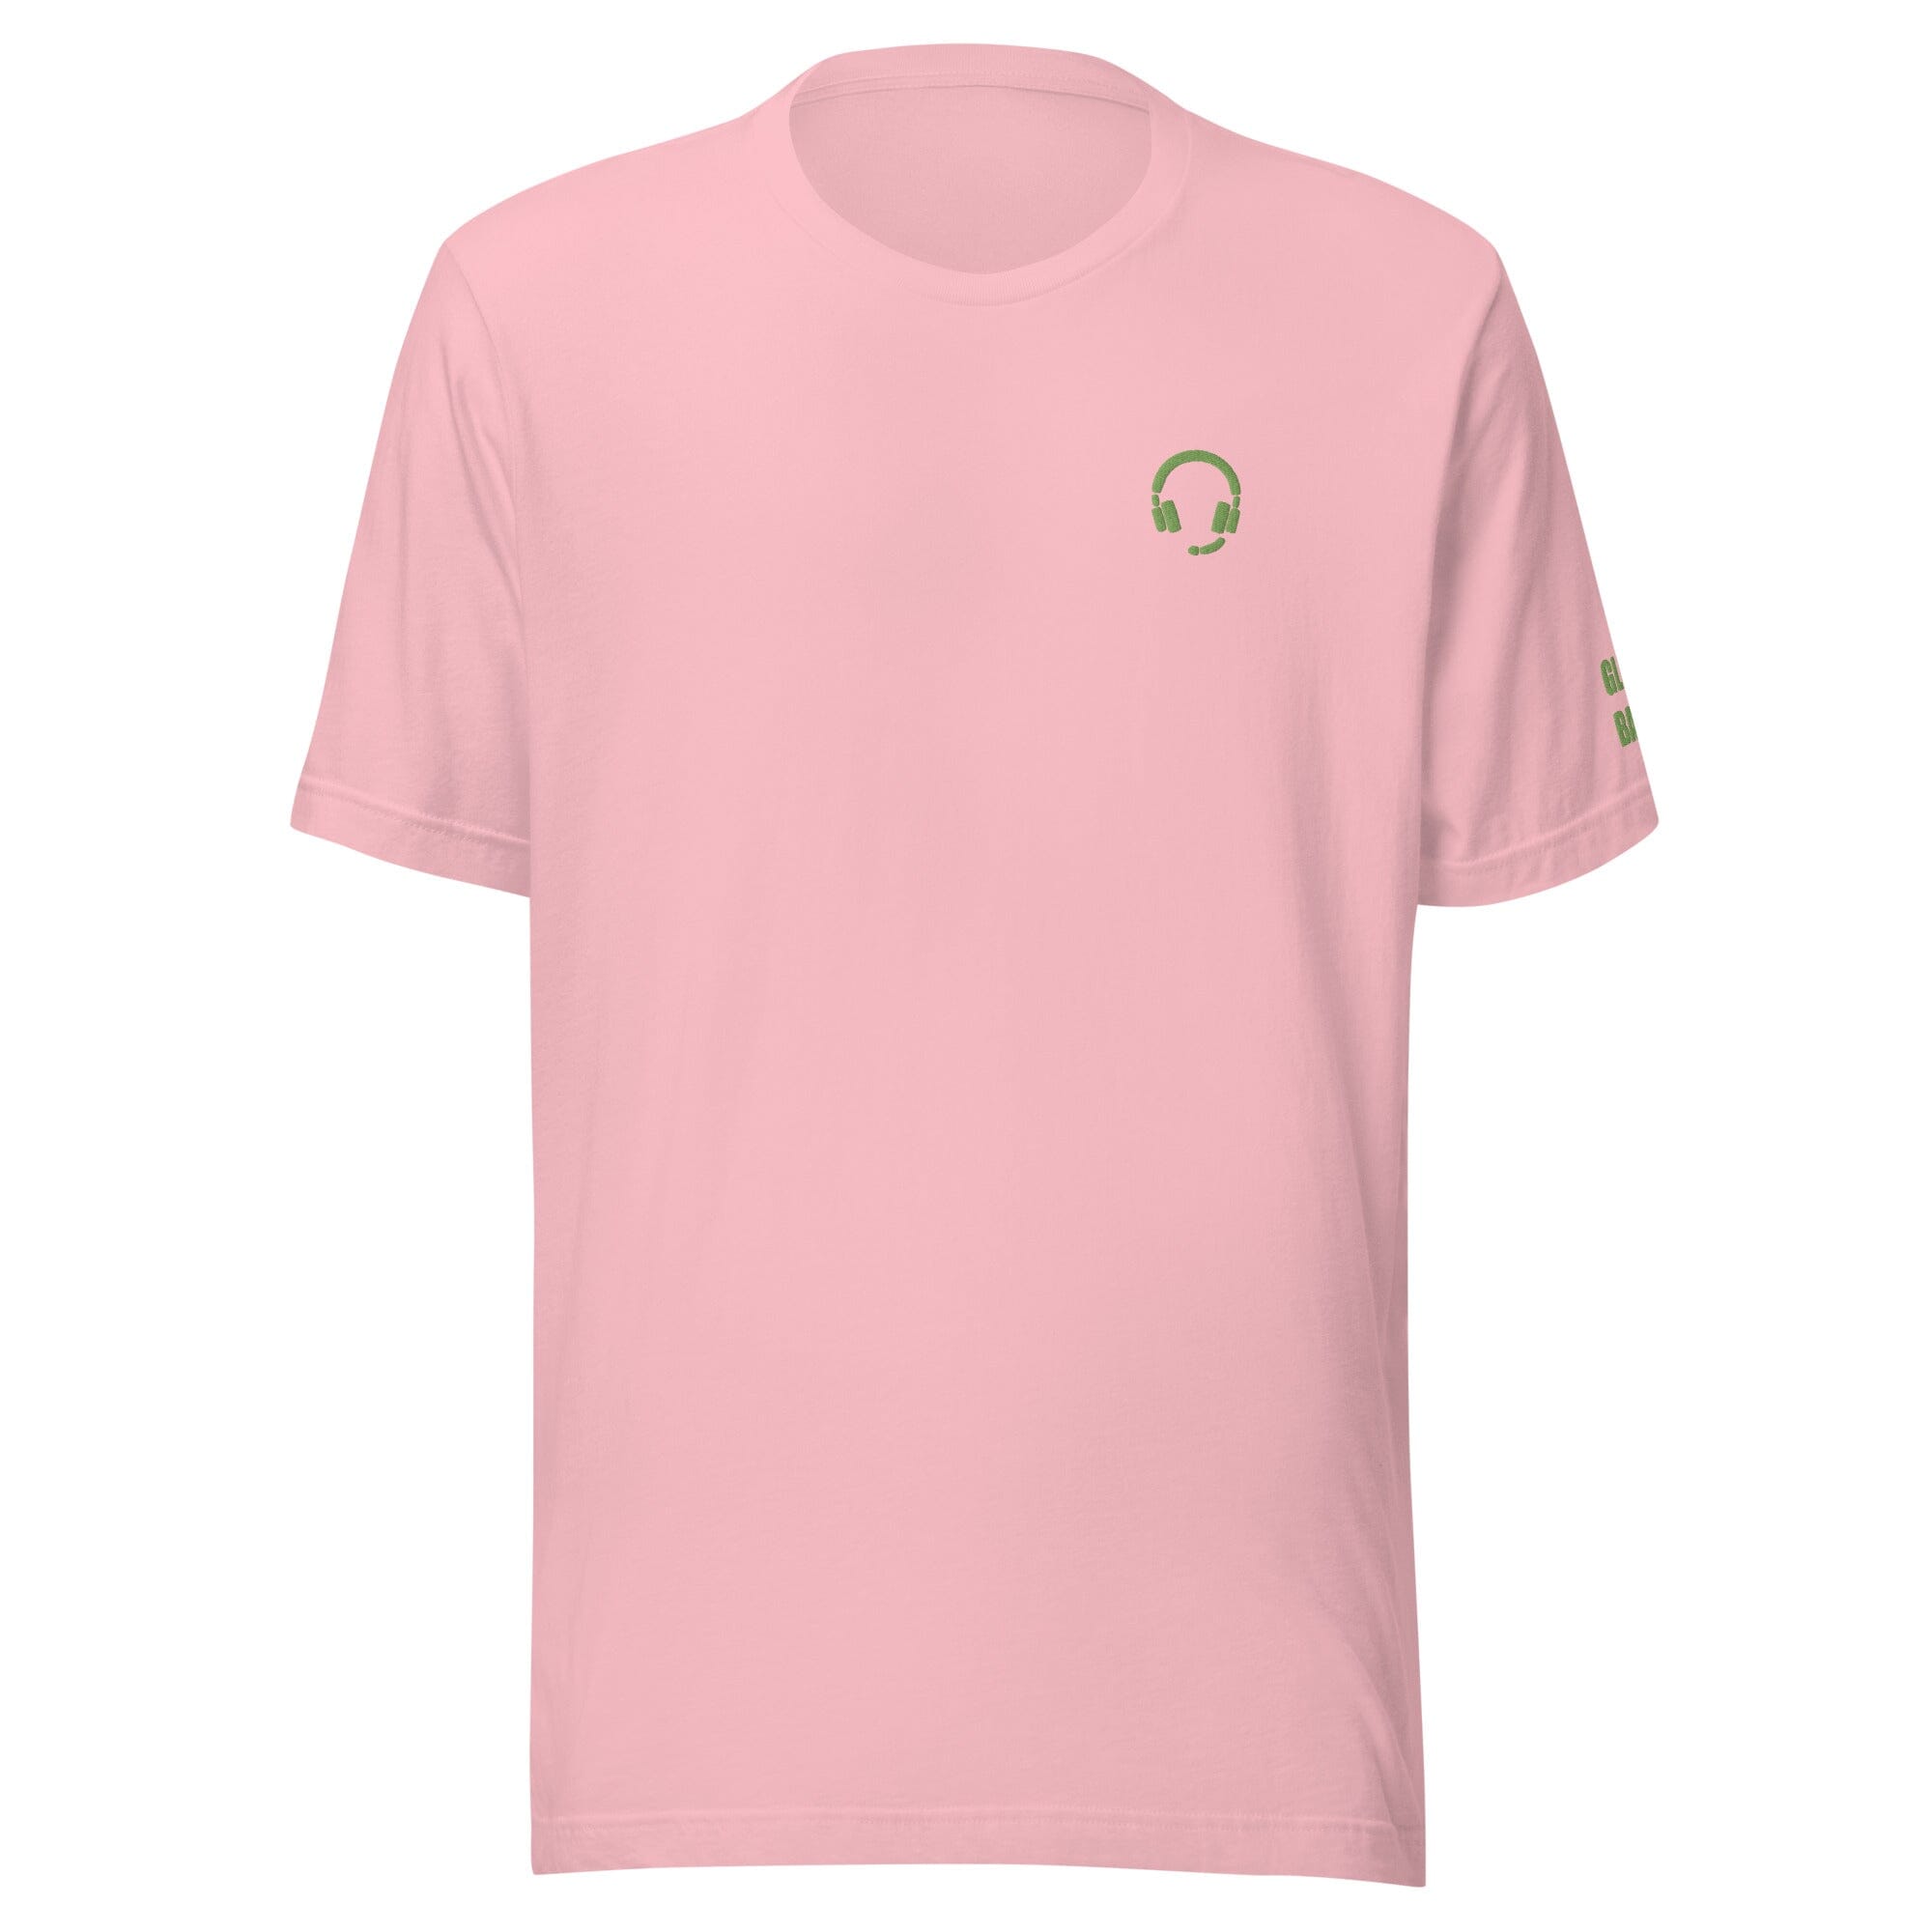 GLHF, Babe | Embroidered Unisex t-shirt | Gamer Affirmations Threads & Thistles Inventory Pink S 